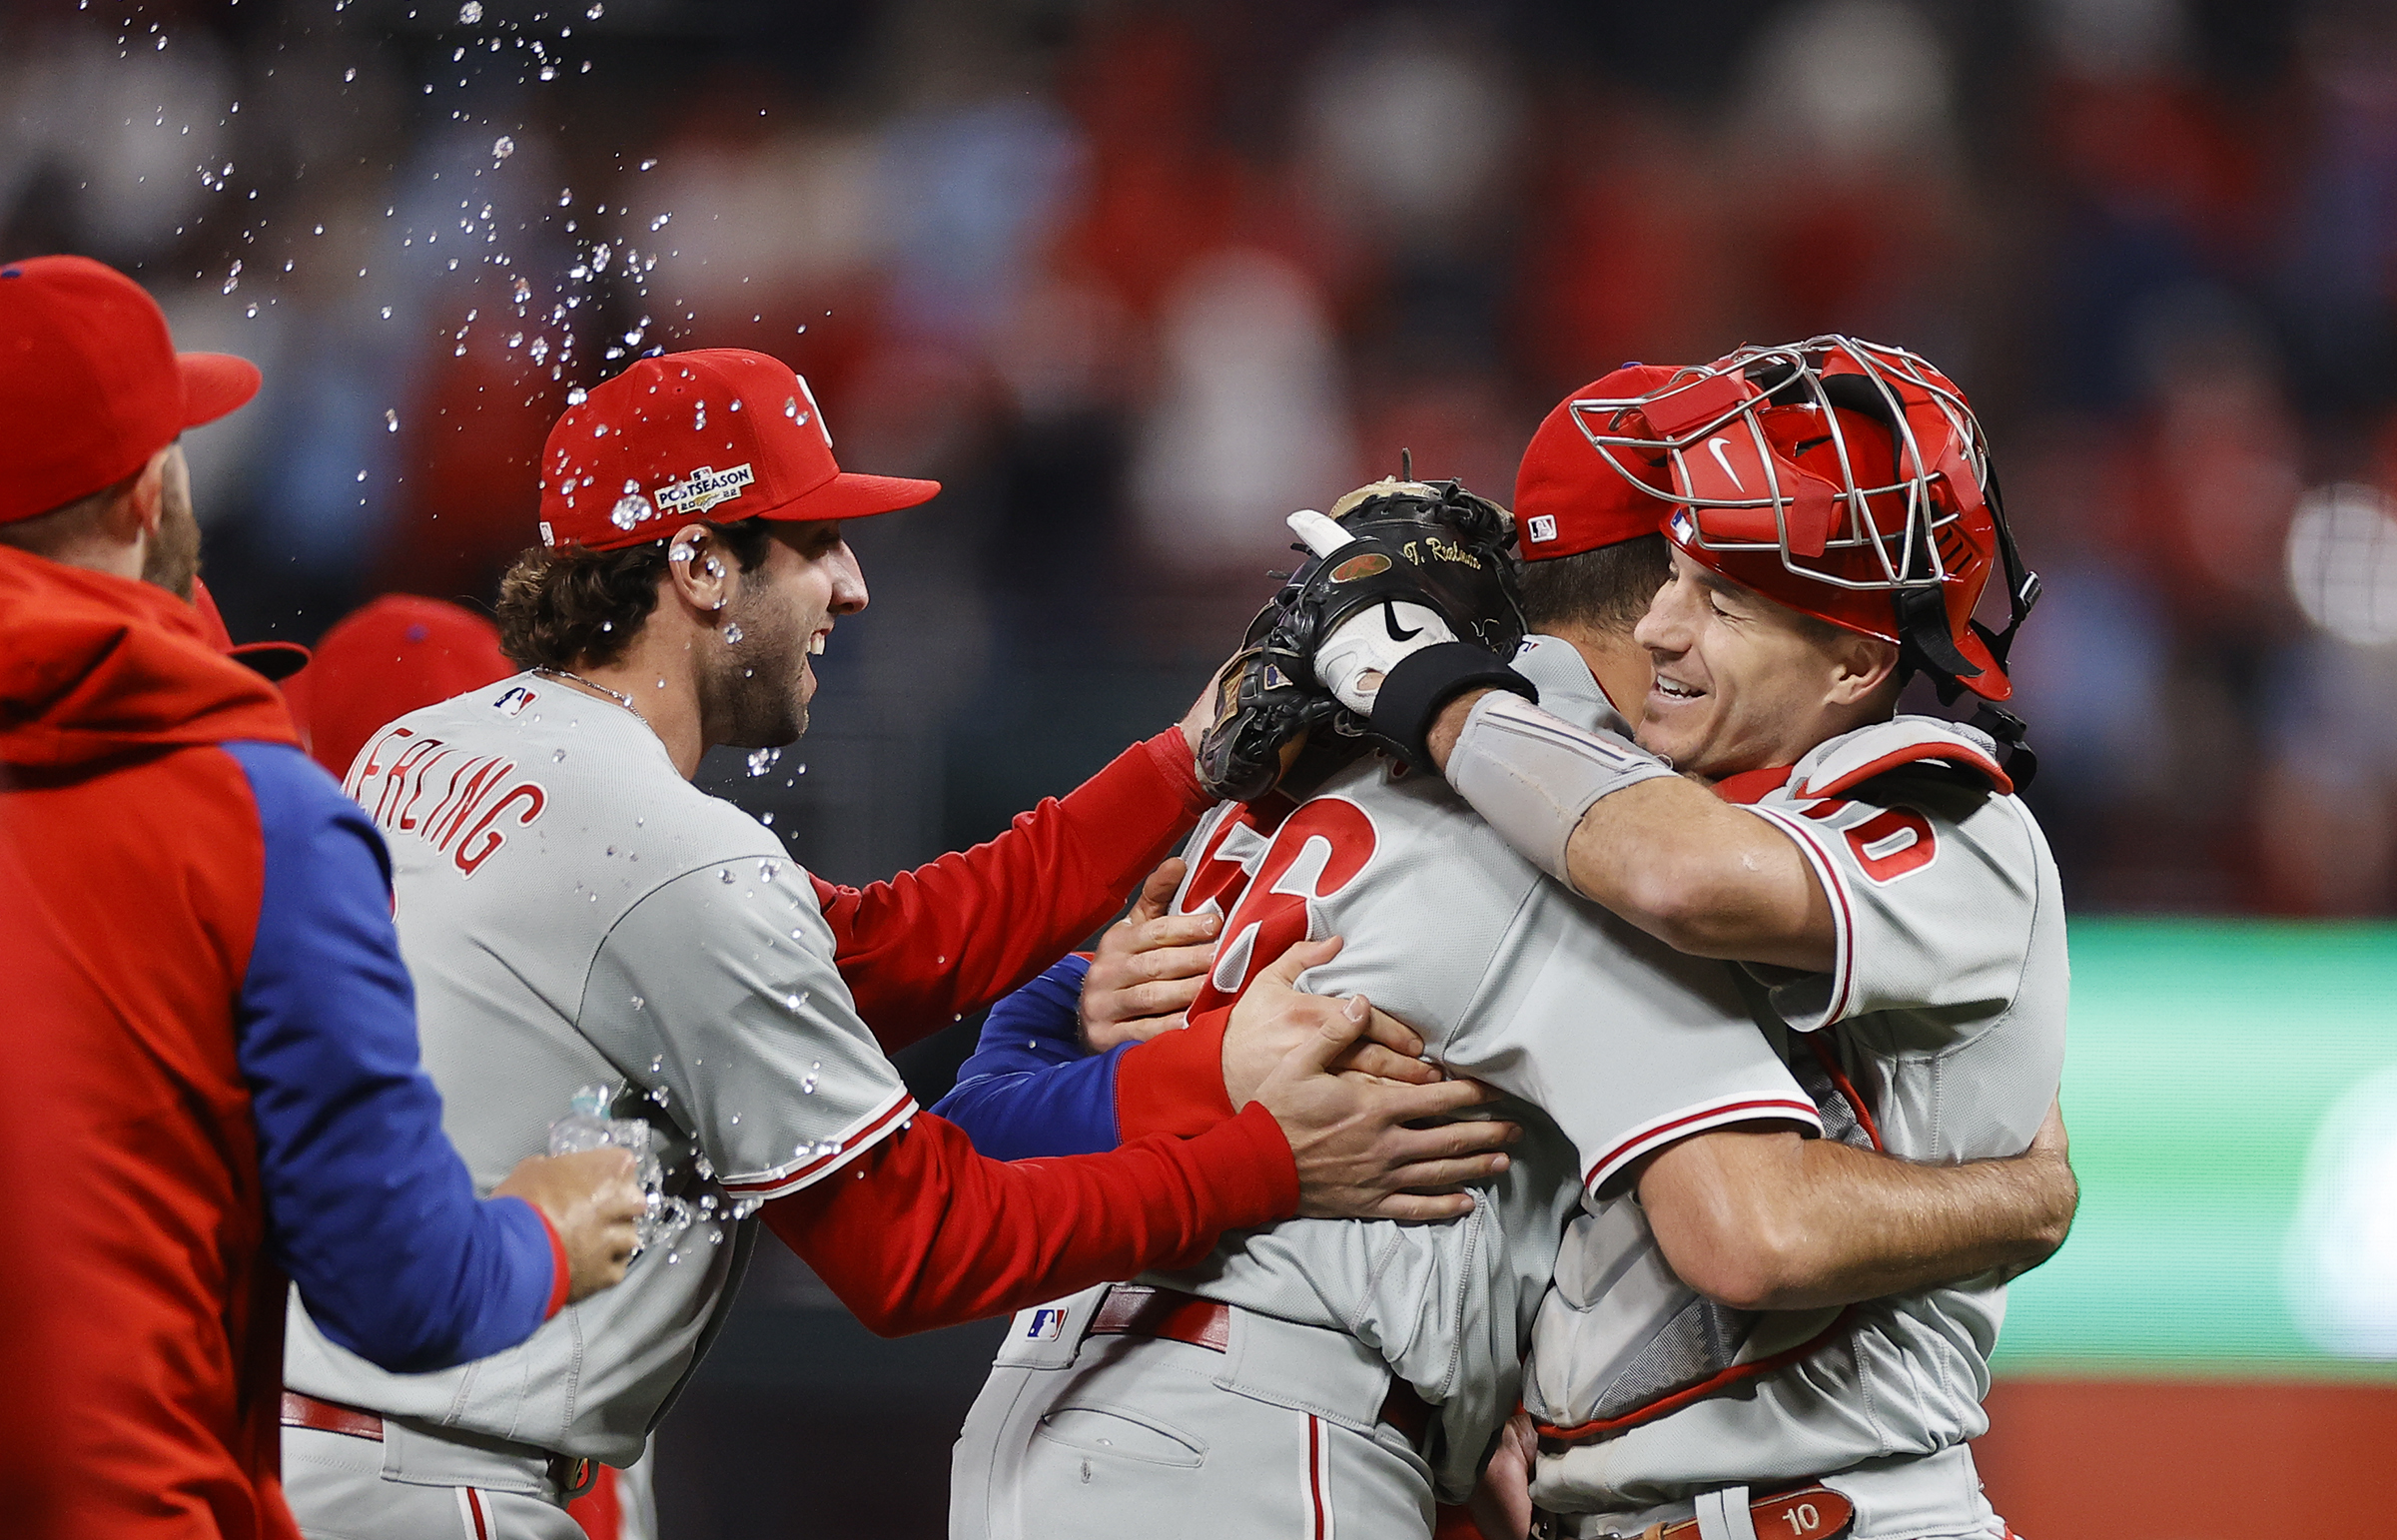 Bring on the Braves: Phillies show they have World Series stuff with sweep  of Cardinals